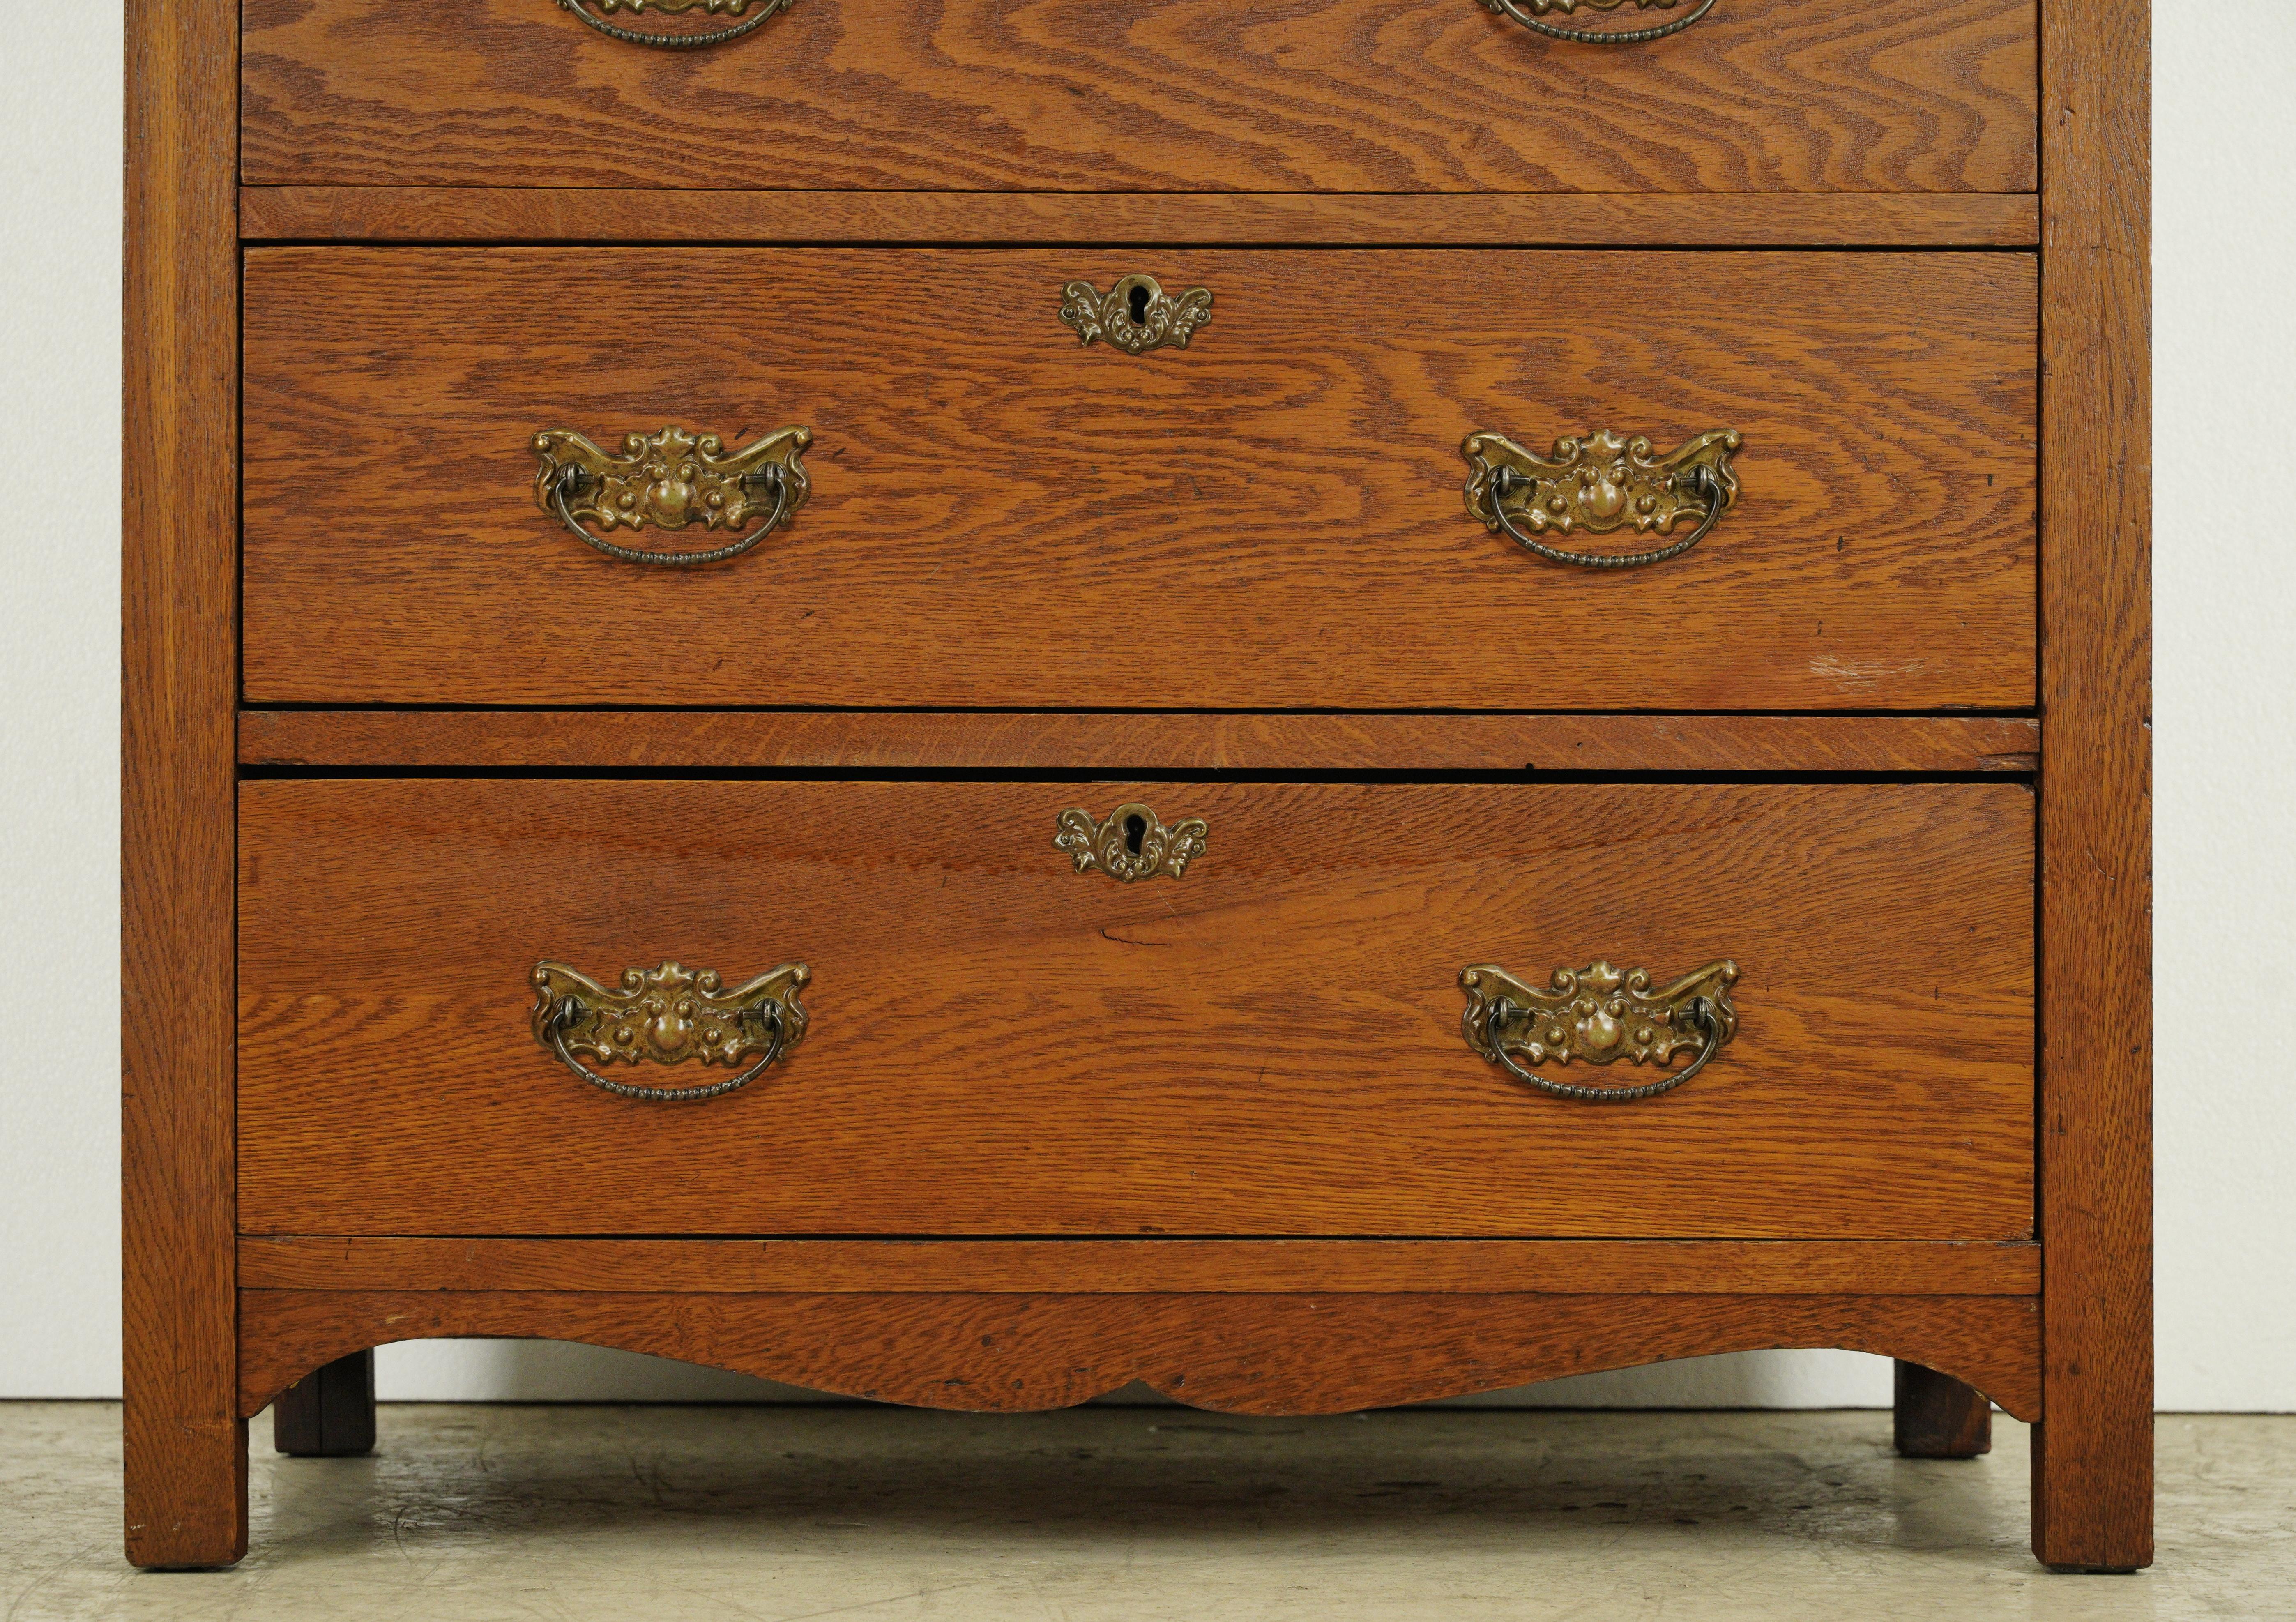 Dark stained oak highboy dresser with five dovetailed drawers and brass and steel hardware. Good condition with appropriate wear from age, with minor dings and scratches. One available. Please note, this item is located in one of our NYC locations.